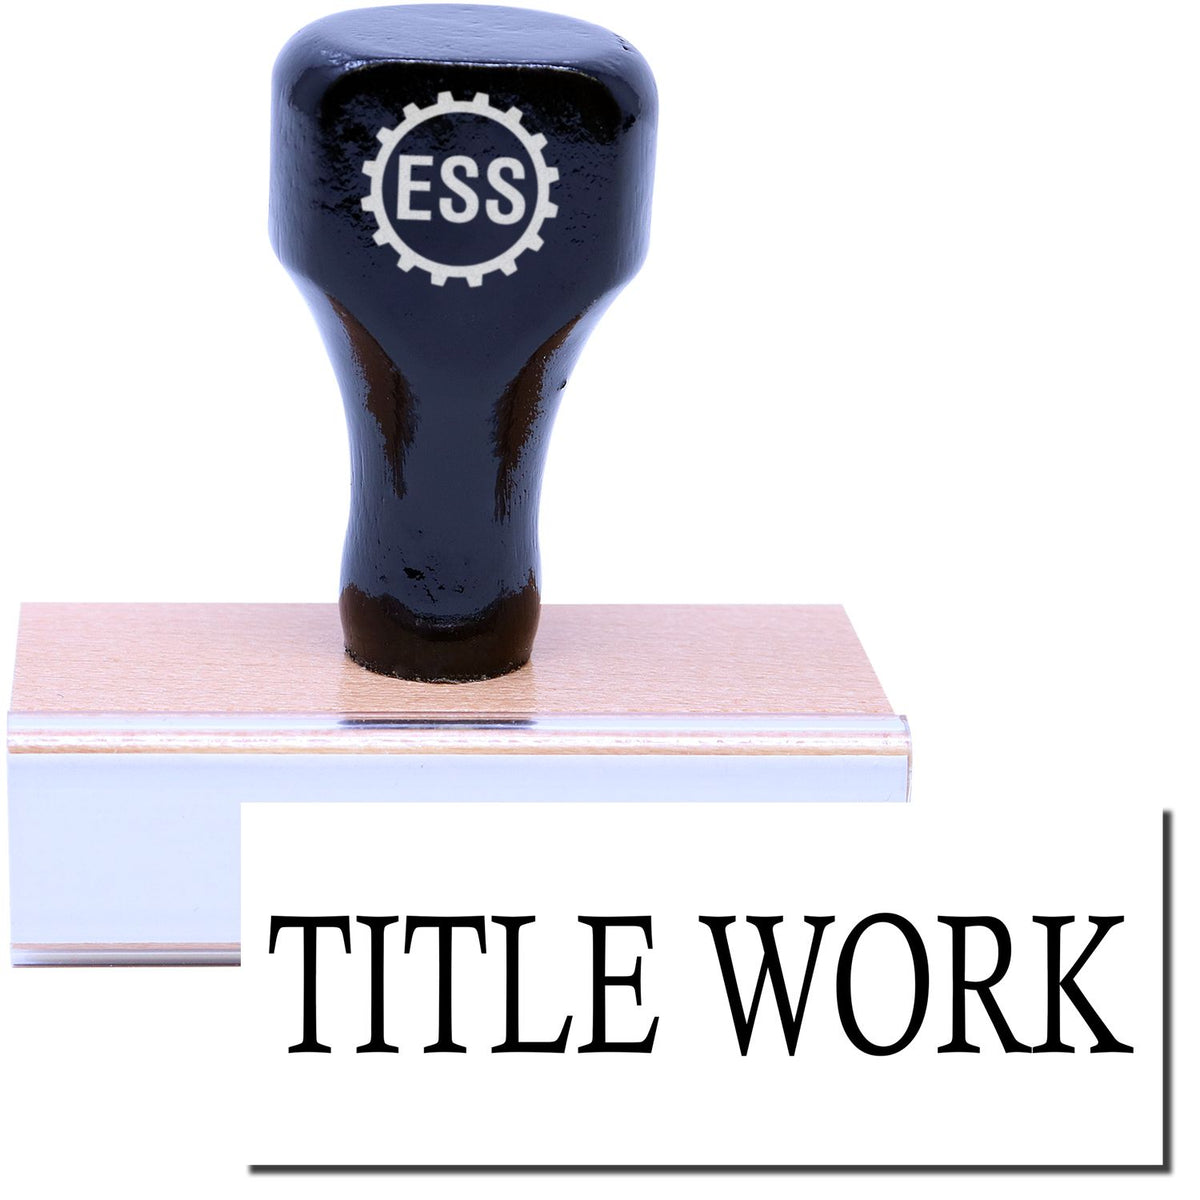 A stock office rubber stamp with a stamped image showing how the text &quot;TITLE WORK&quot; in a large font is displayed after stamping.